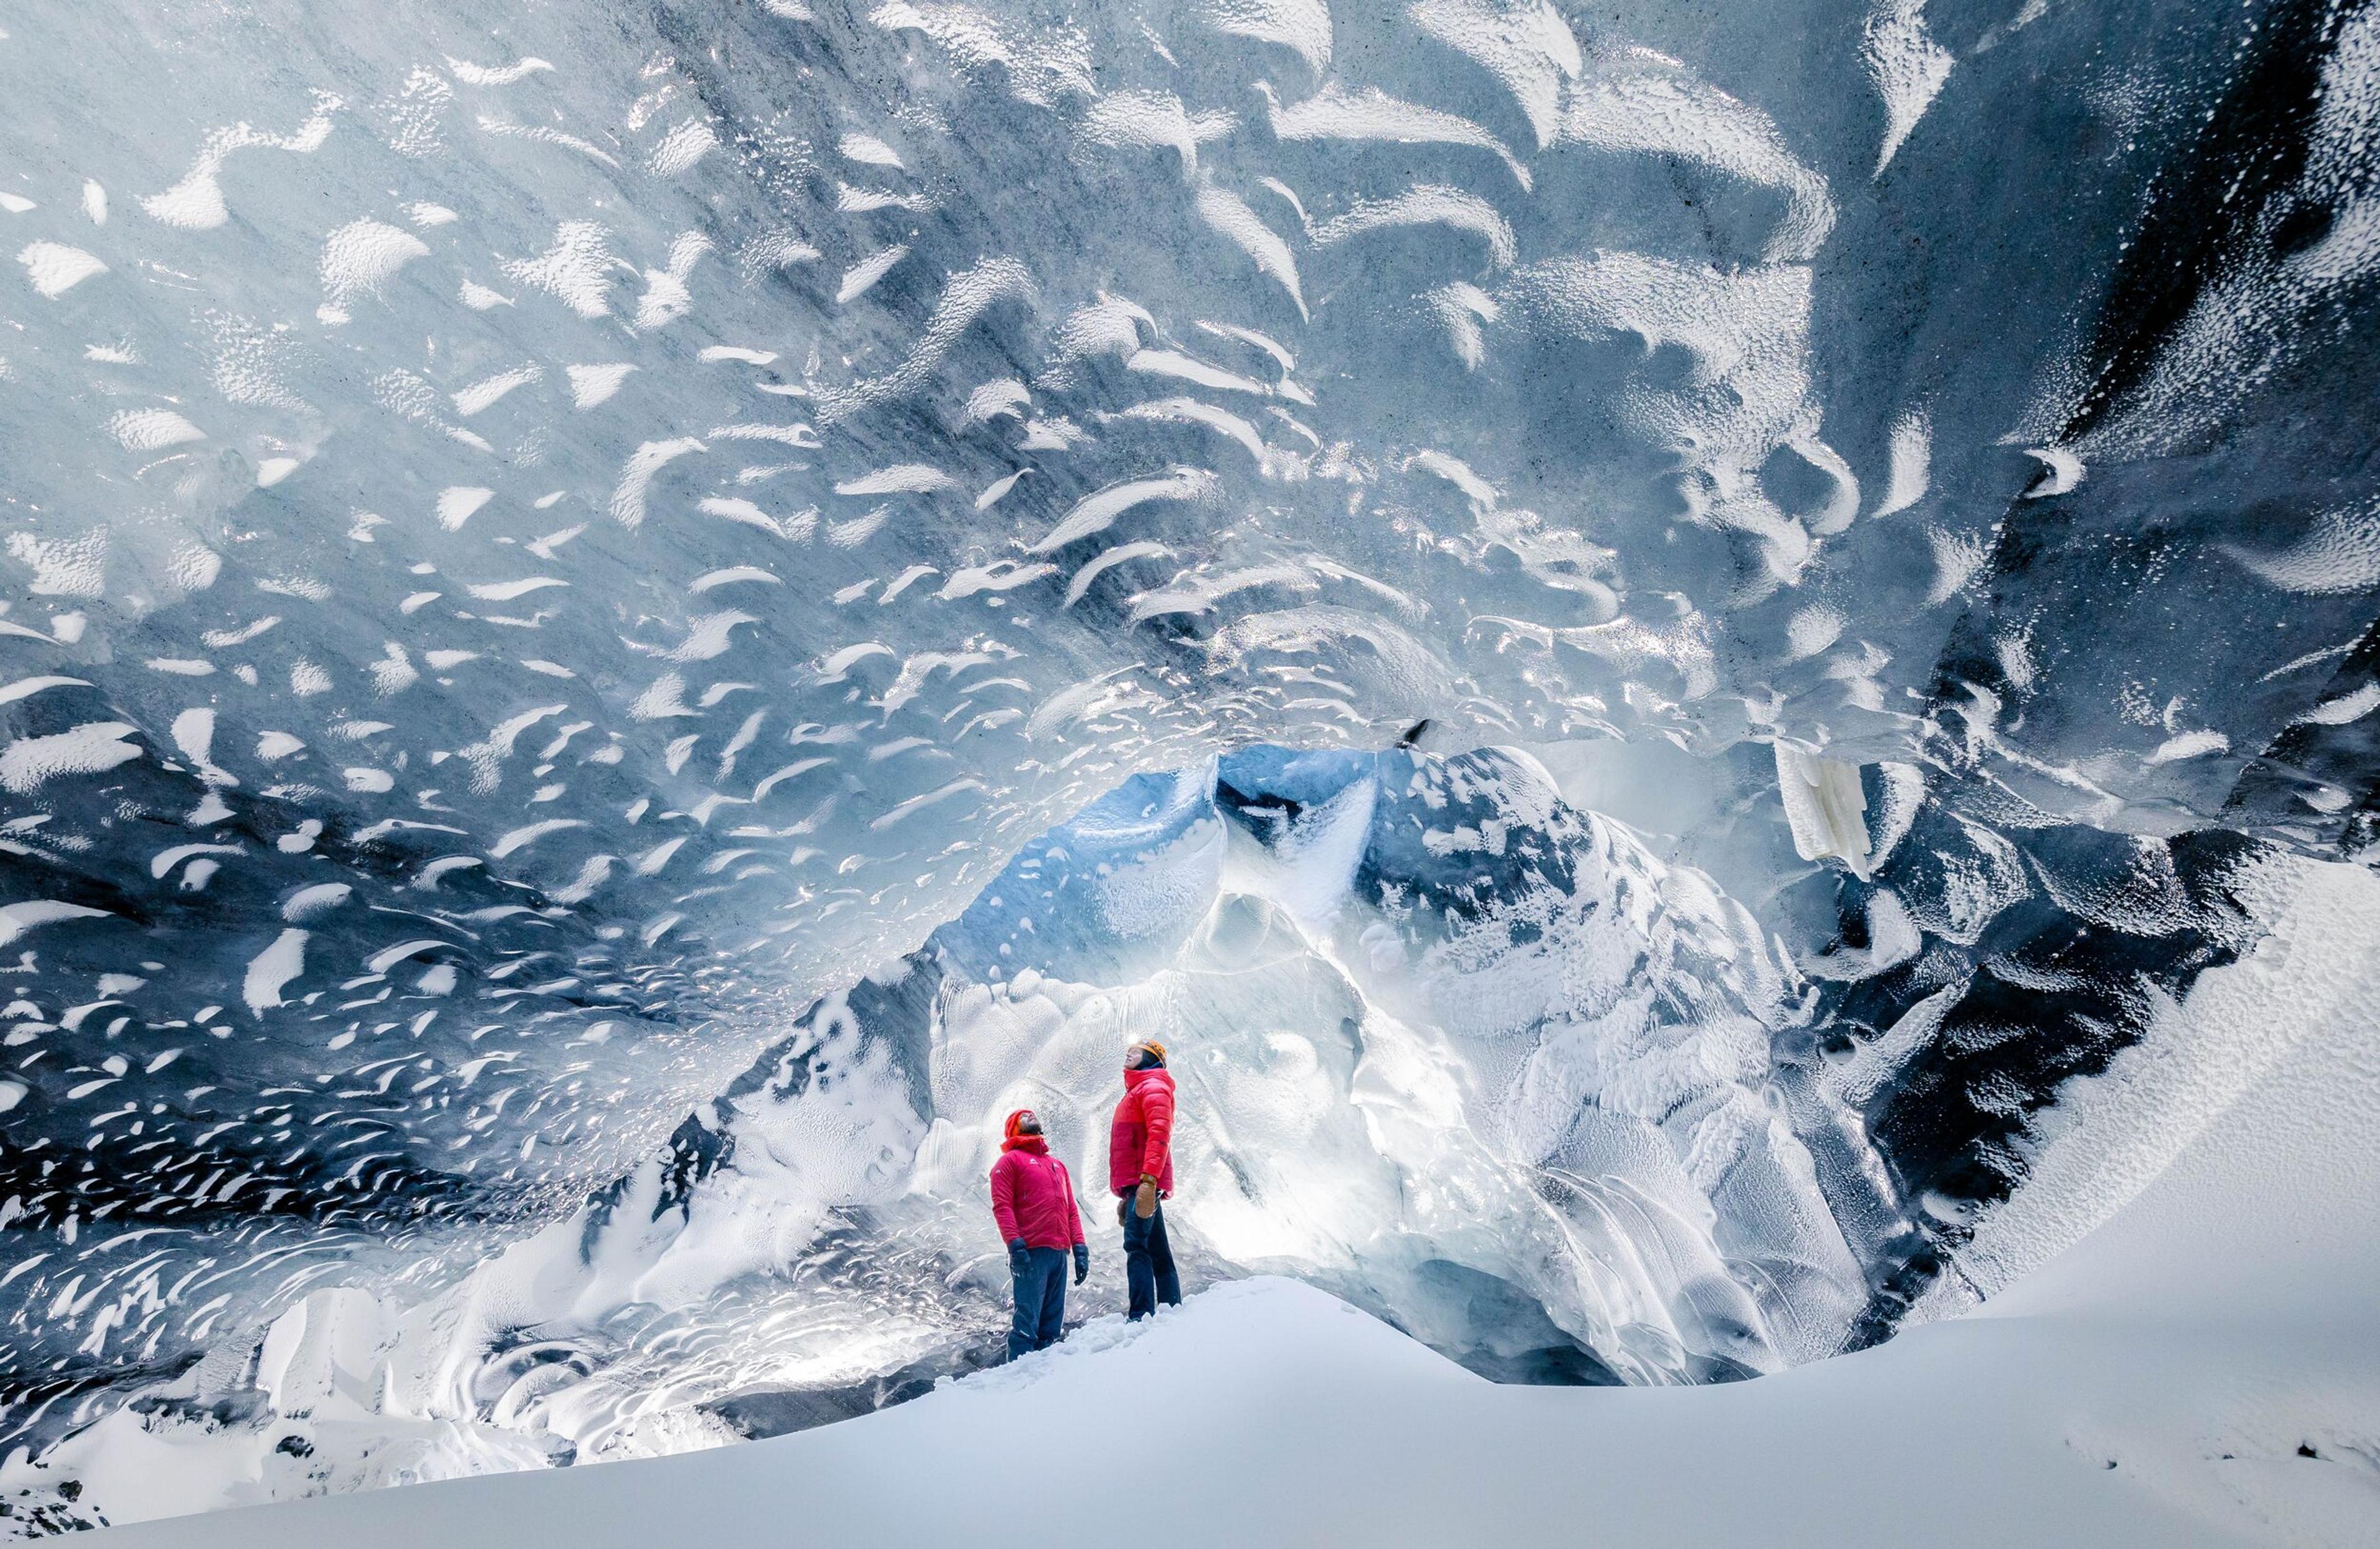 Two people in bright jackets standing at the entrance of a vast ice cave, with one person pointing towards the inside. The cave's inner walls glisten with layers of ice, and the snow on the ground enhances the cave's ethereal beauty.